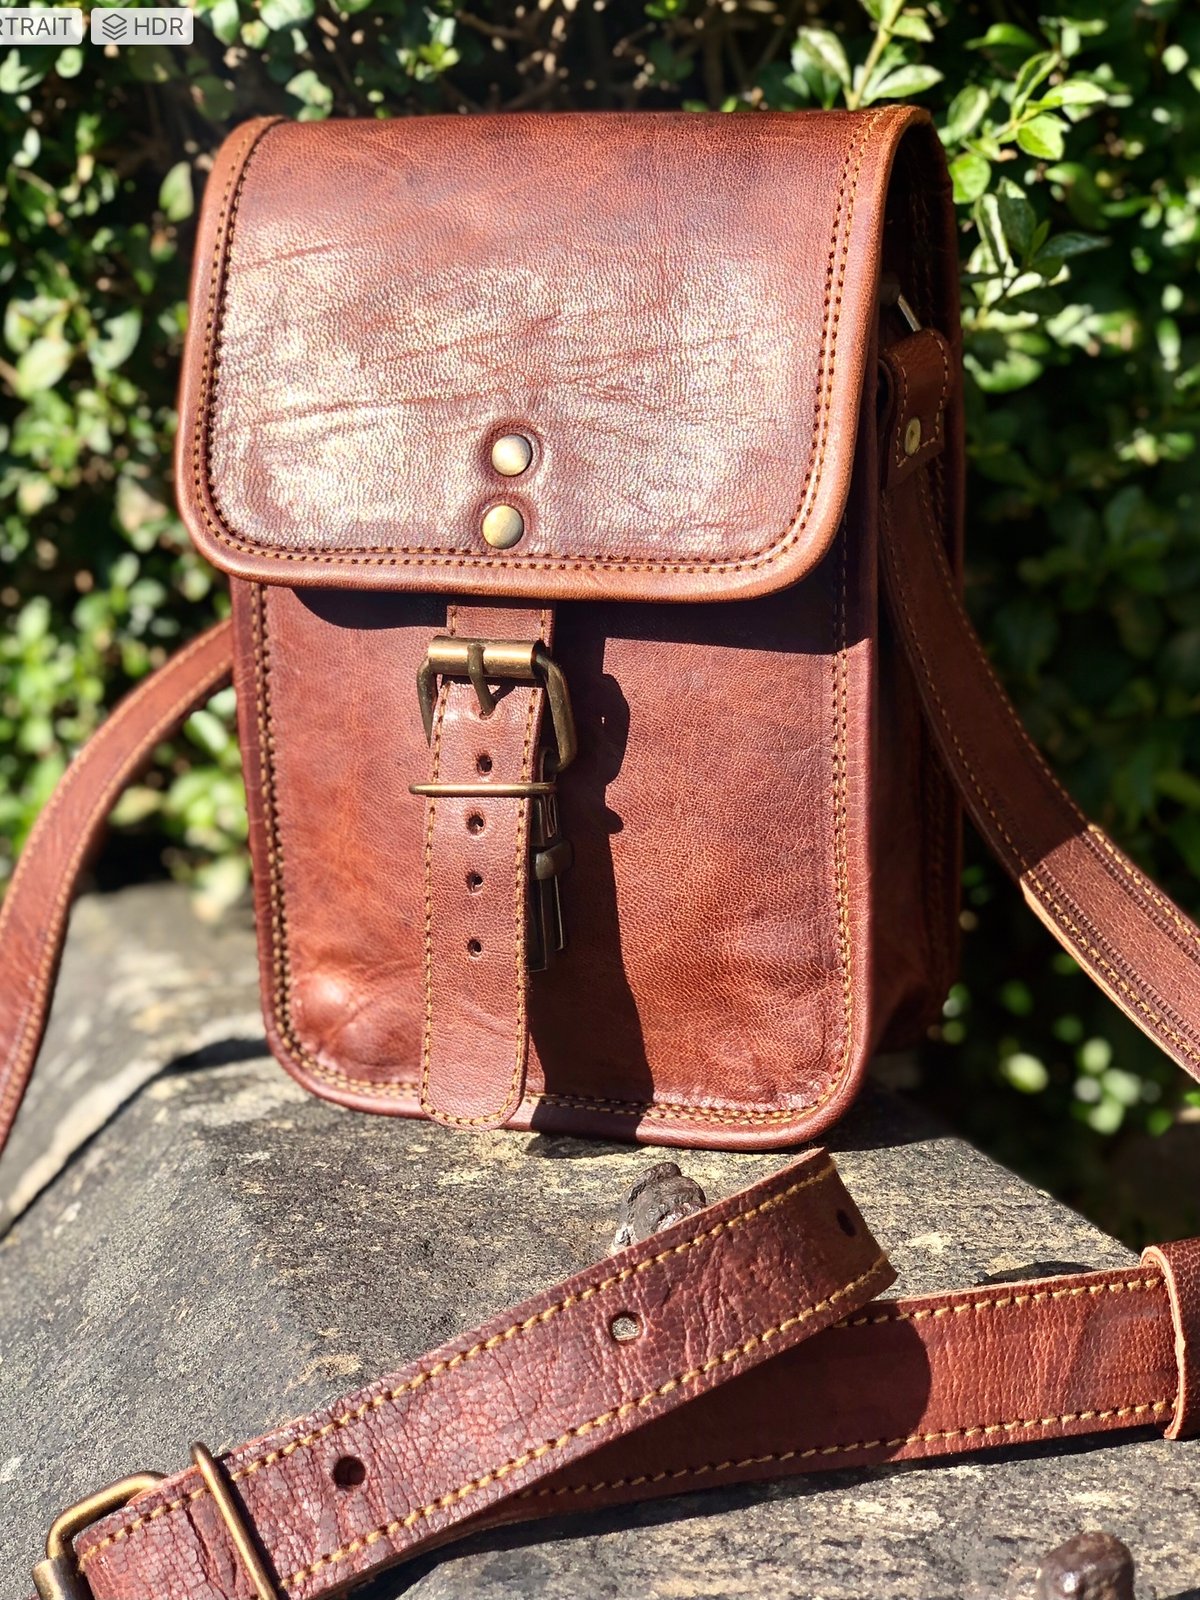 10 Cheap Leather Bags For Men Under 200  The Handmade Store